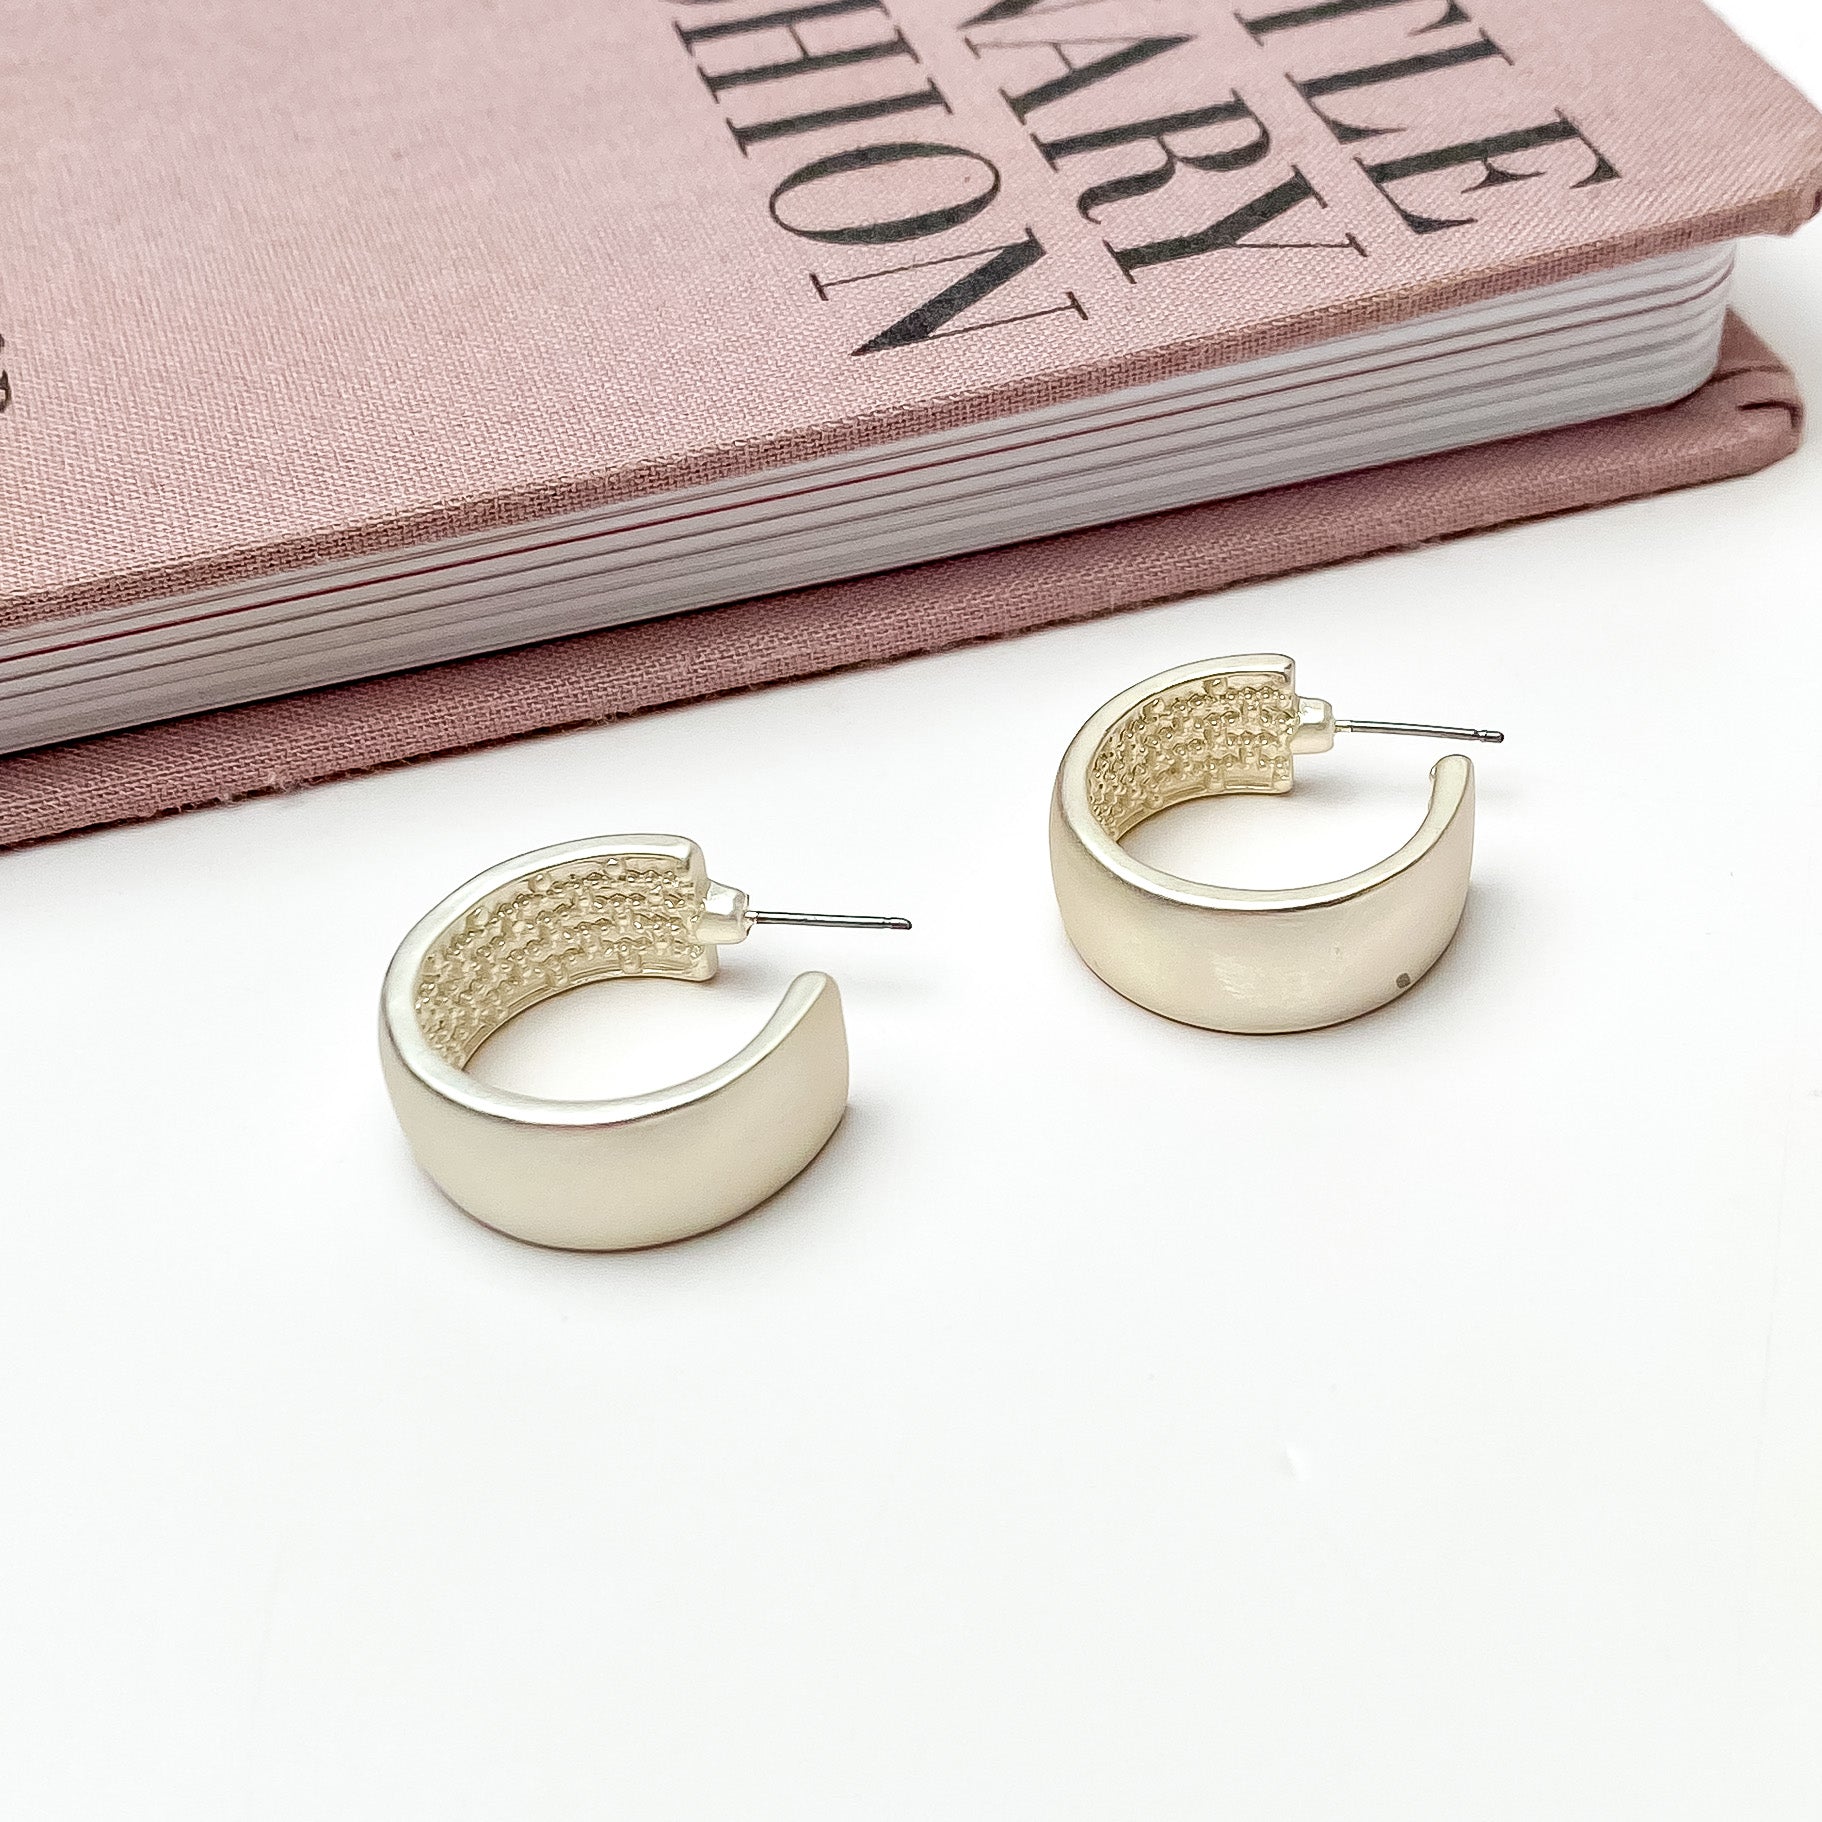 Silver Tone Hoop Earrings With a Textured Inside. Pictured on a white background with a book laying above the earrings.